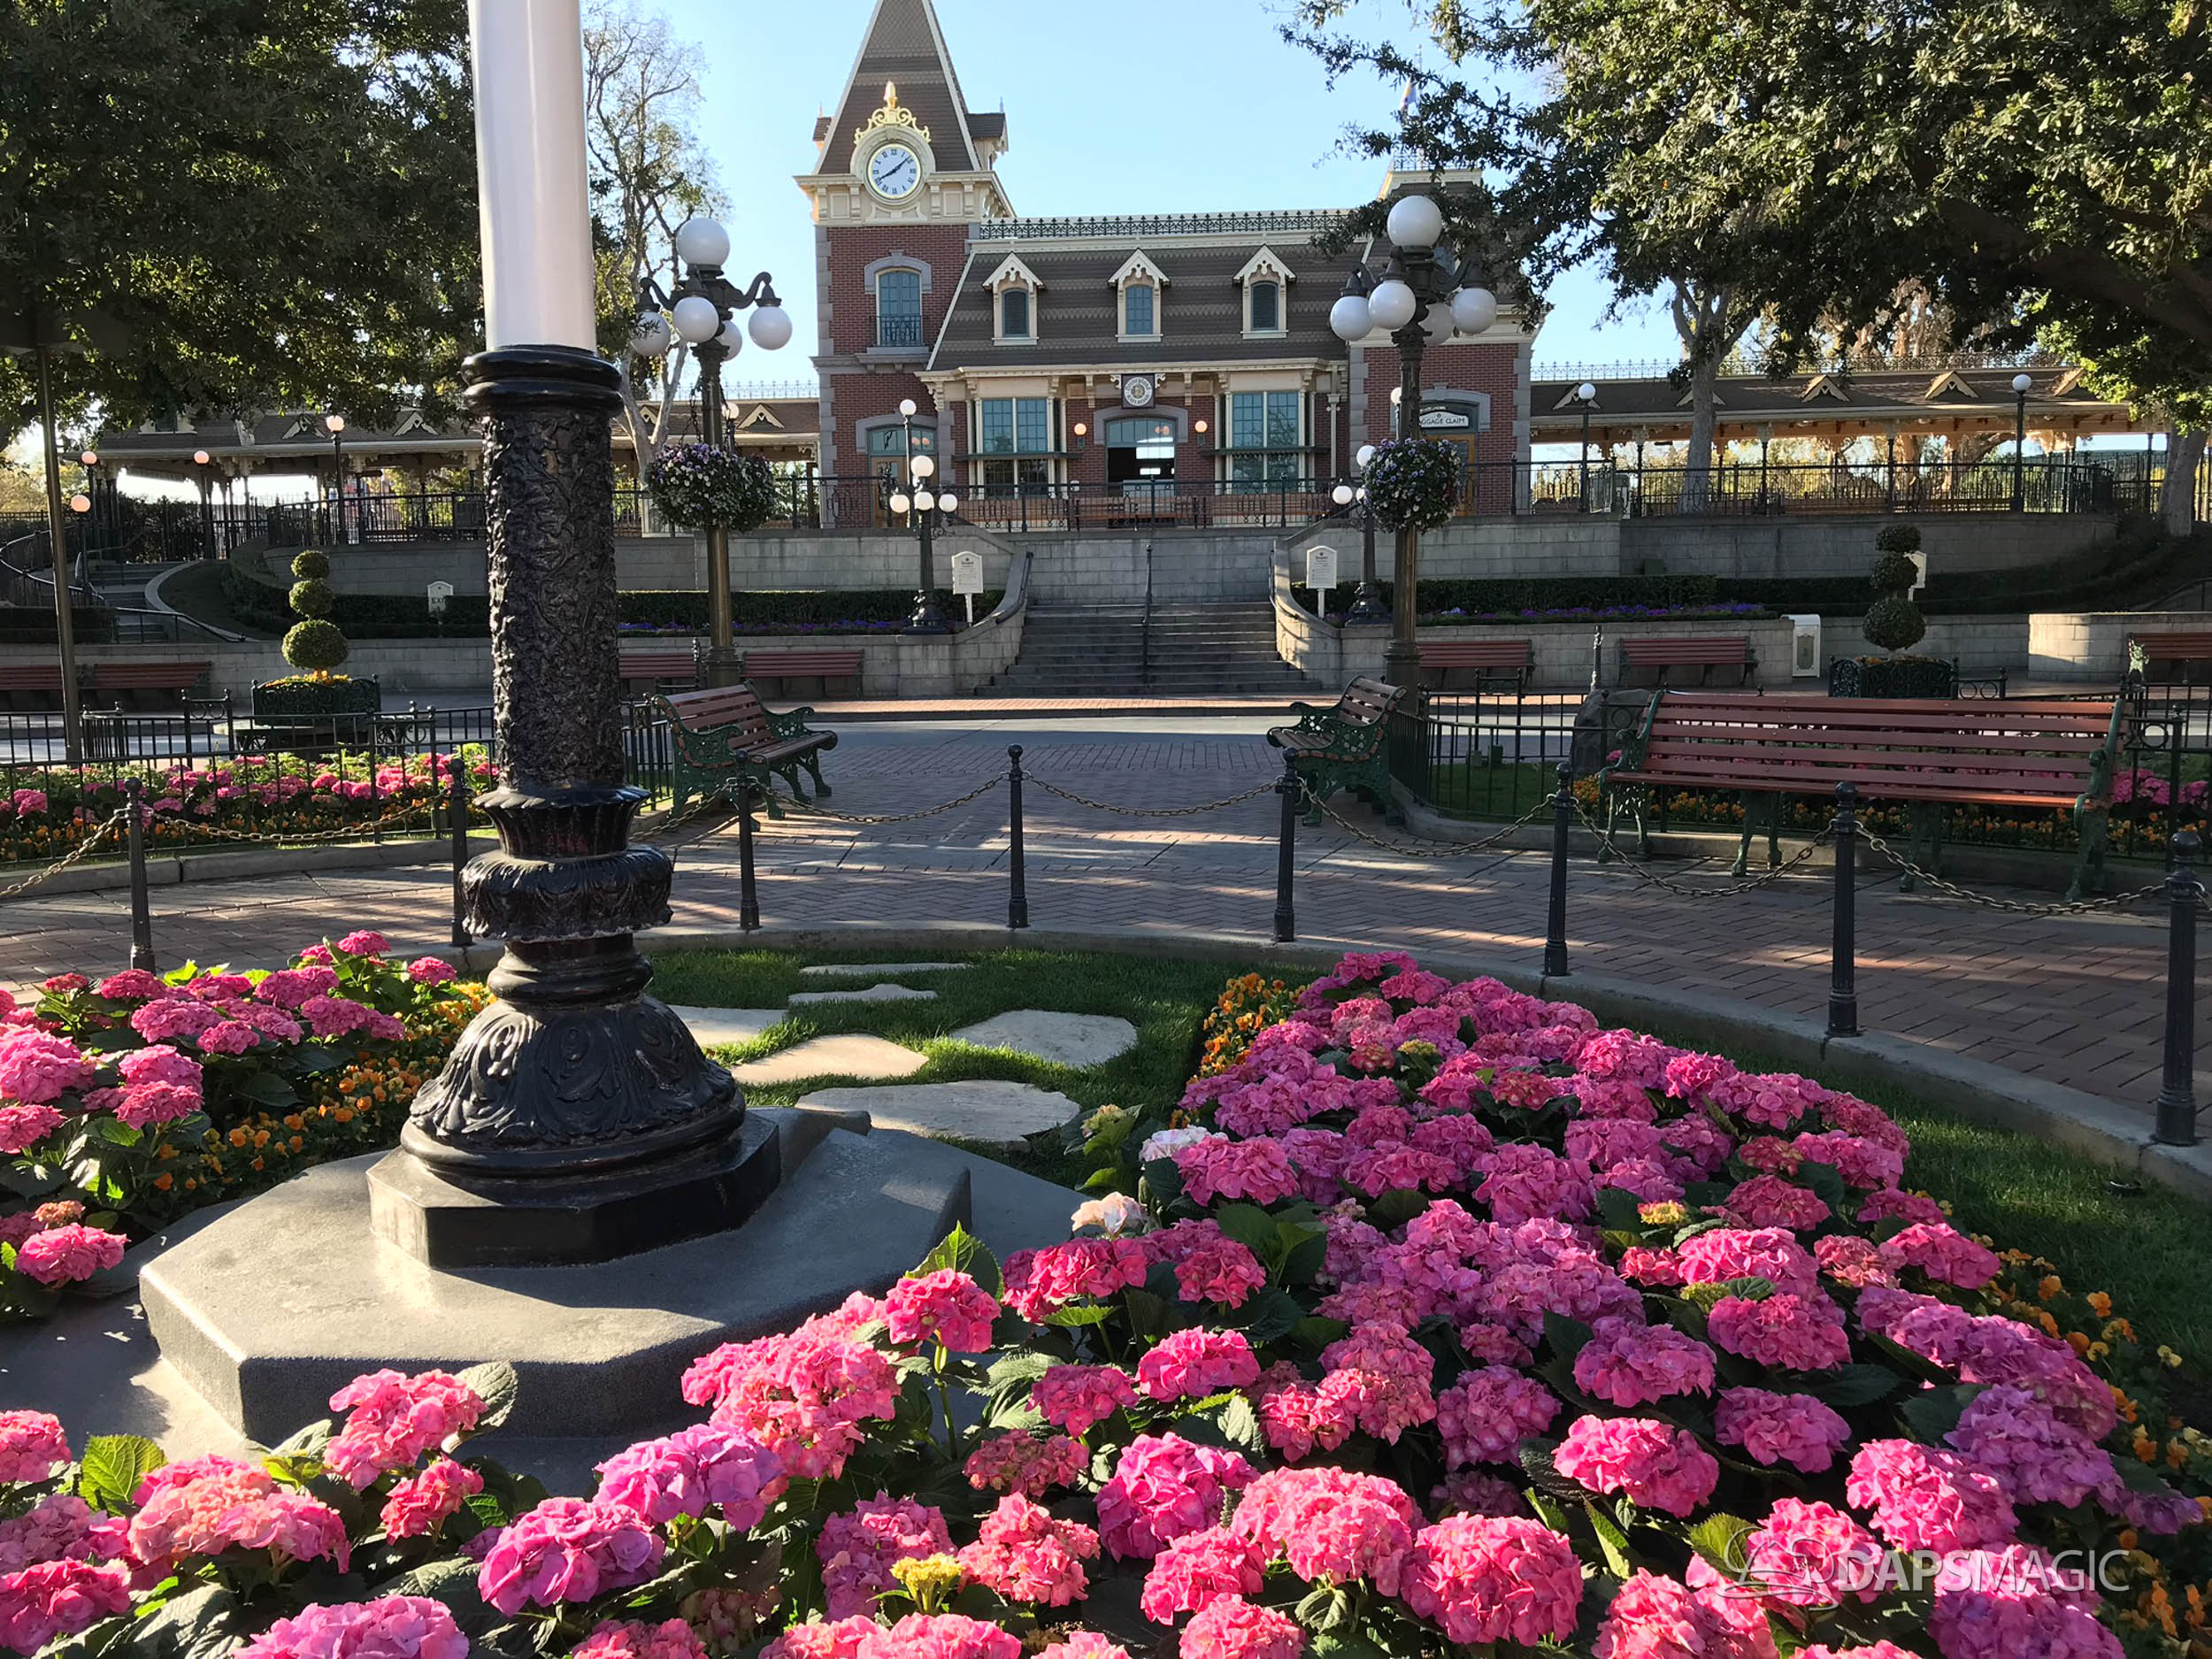 New Brick Around Streetcar Track Revealed as Town Square Walls Come Down at Disneyland